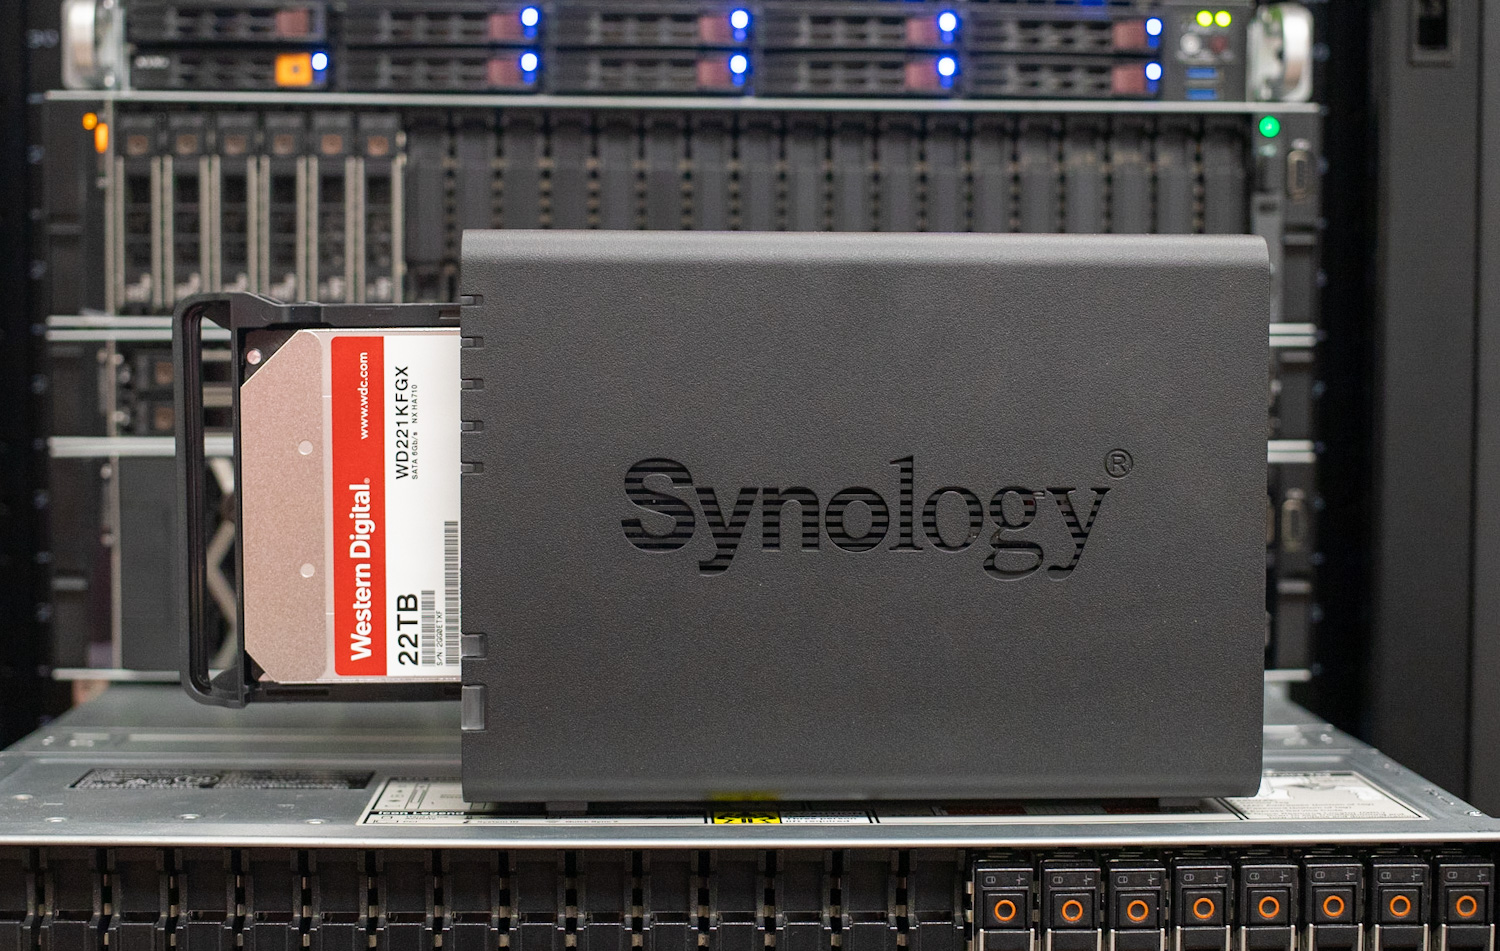 Synology DS224+ NAS Revealed - Good News and Bad News! 